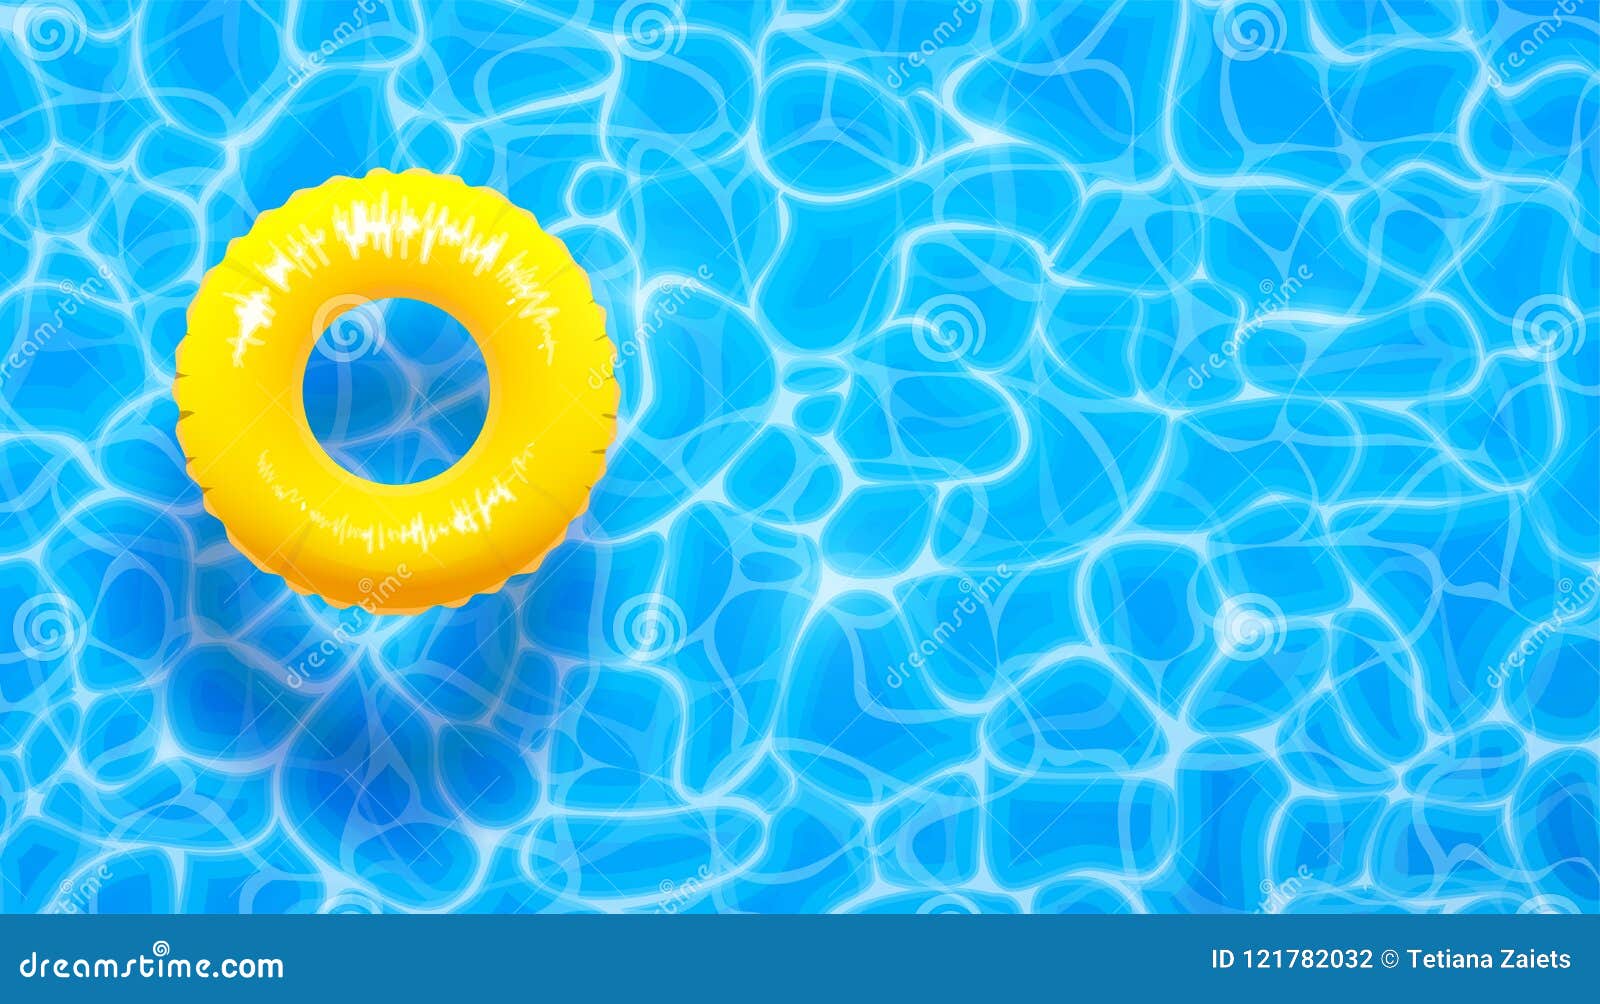 water pool summer background with yellow pool float ring. summer blue aqua textured background